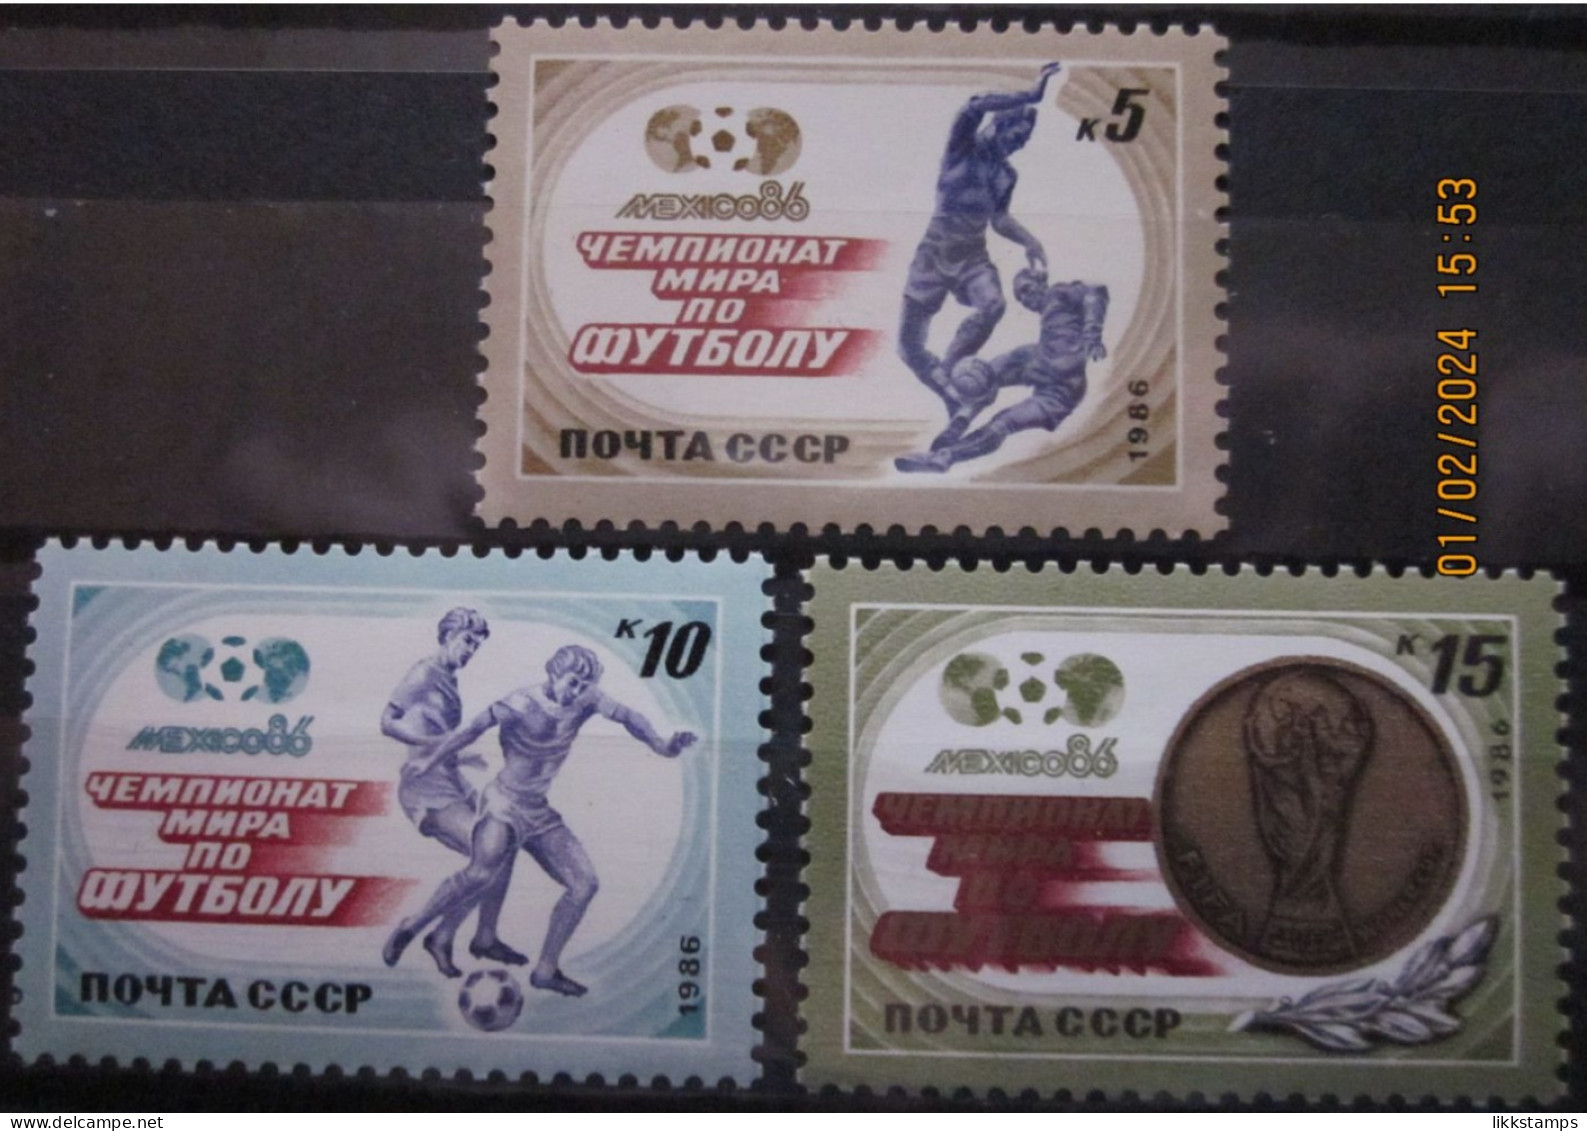 RUSSIA ~ 1986 ~ S.G. NUMBERS 5660 - 5662, ~ 'LOT C' ~ FOOTBALL. ~ MNH #03645 - Ungebraucht